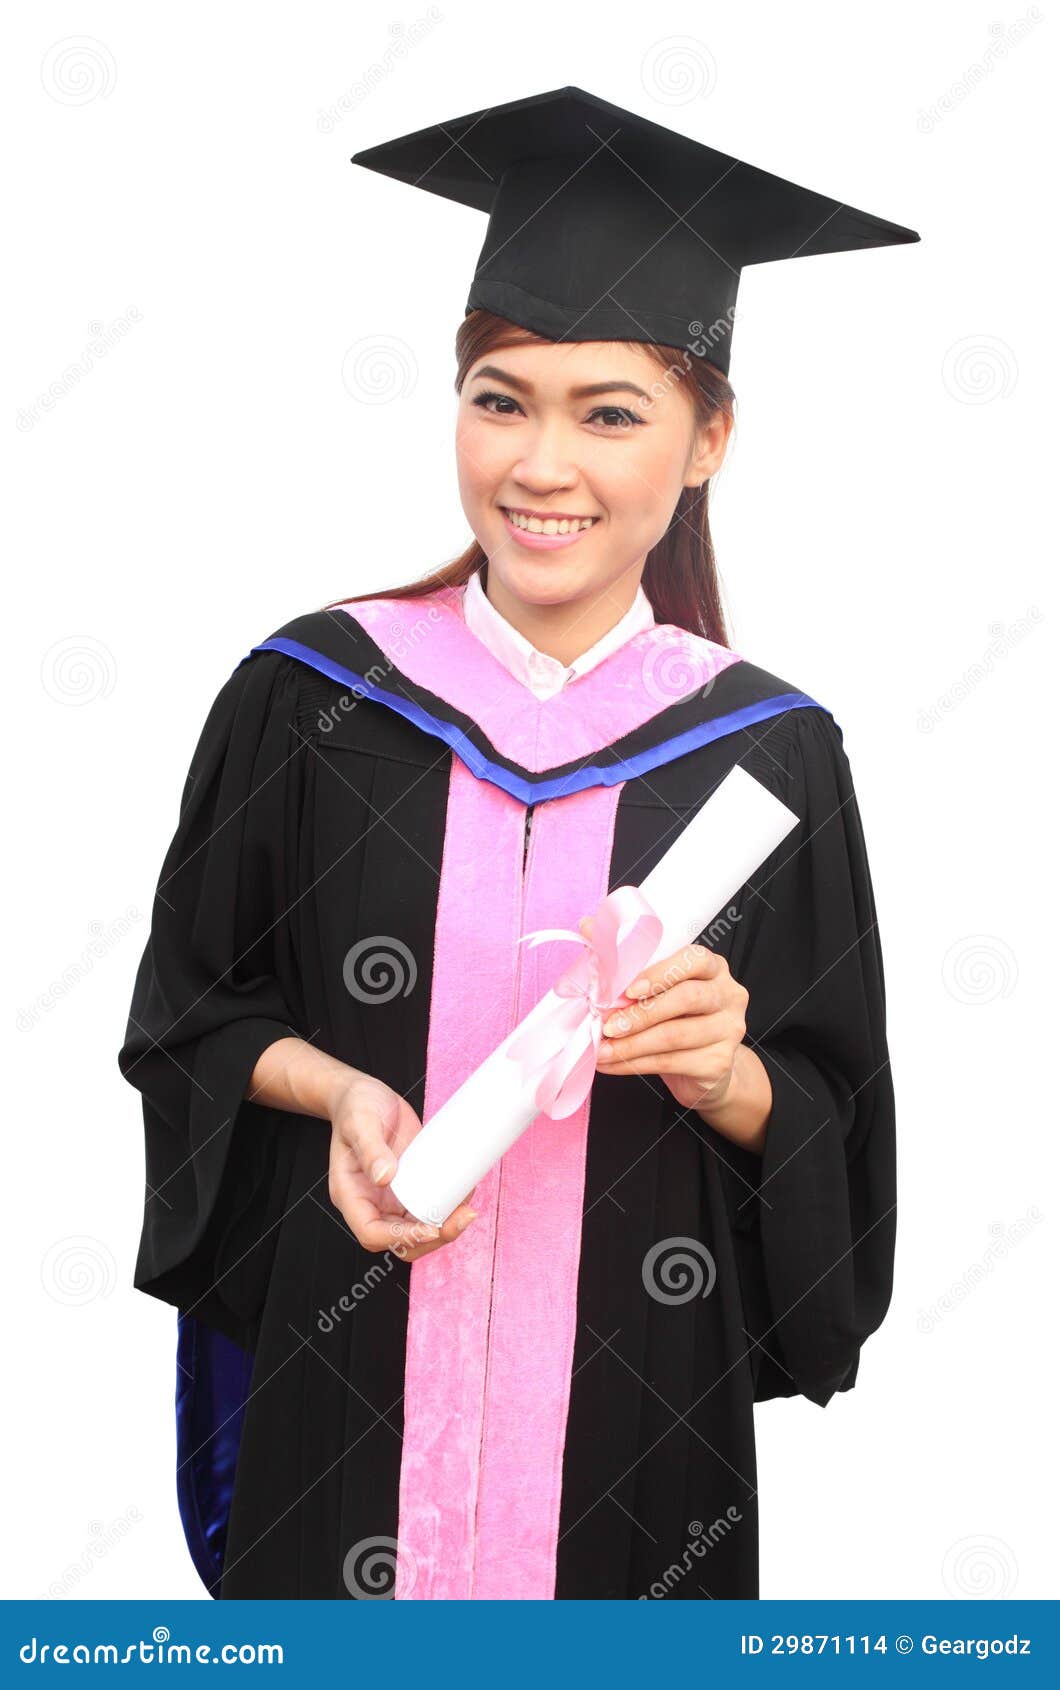 Woman With Graduation Cap And Gown With Arm Raised Stock Images ...